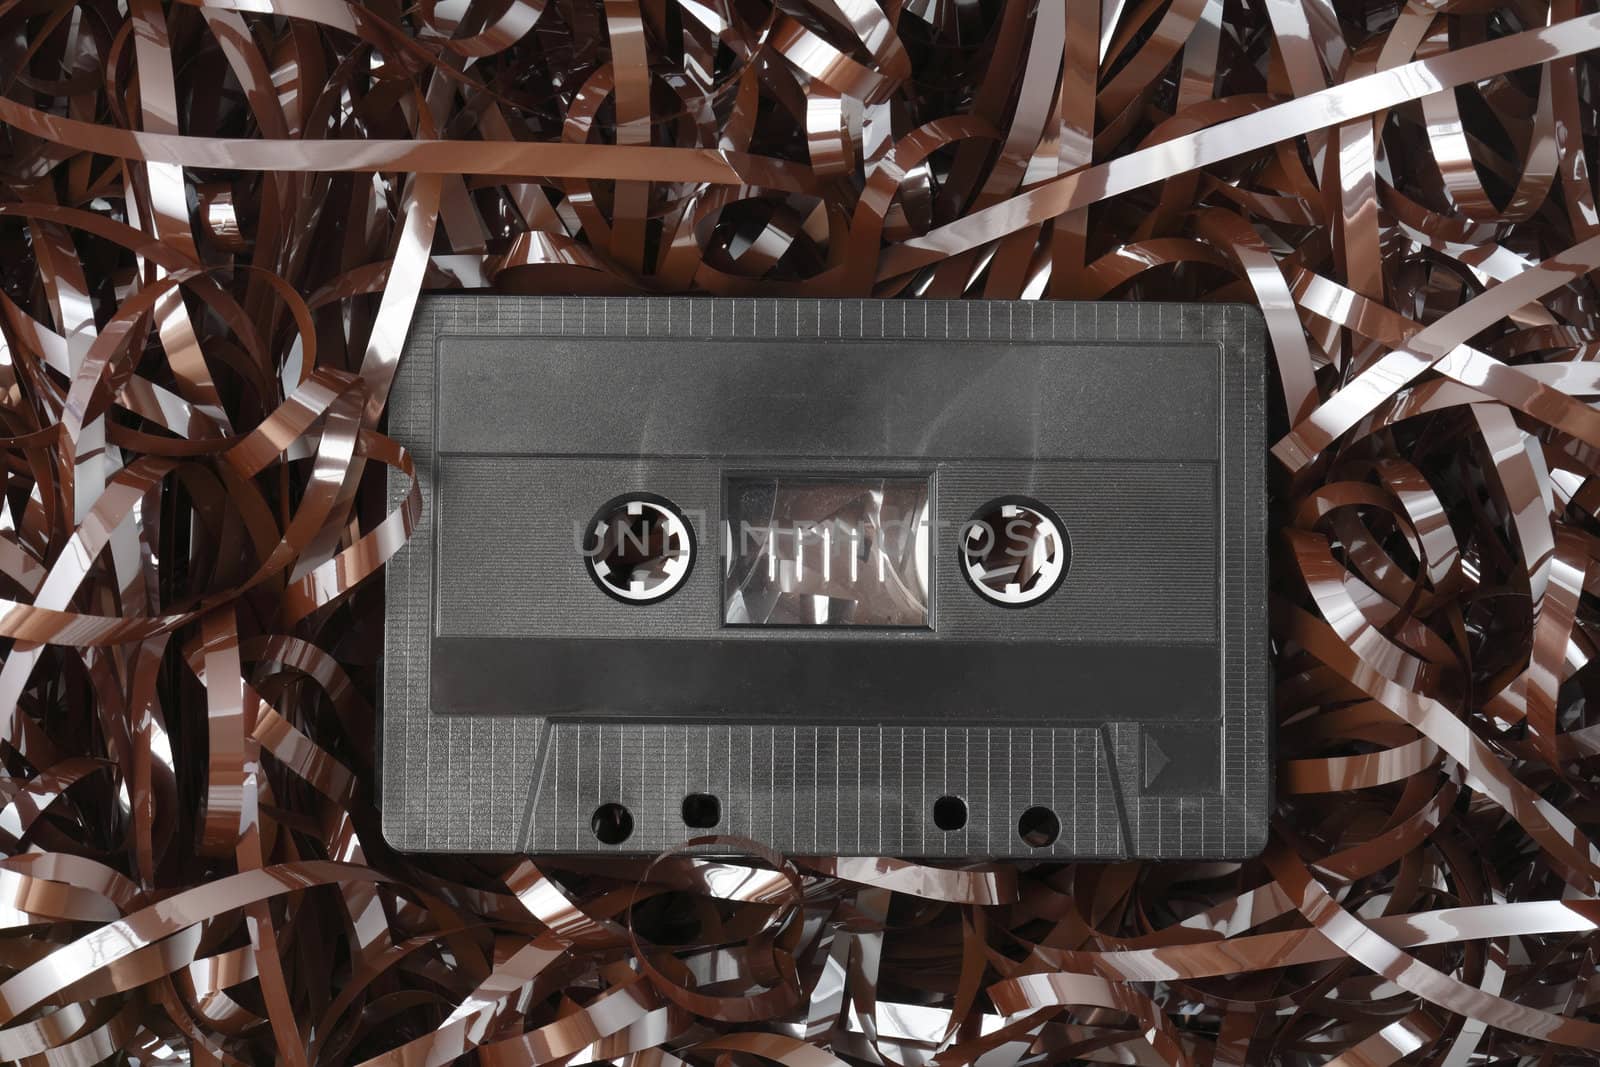 Old black audio C-cassette and tangled tape